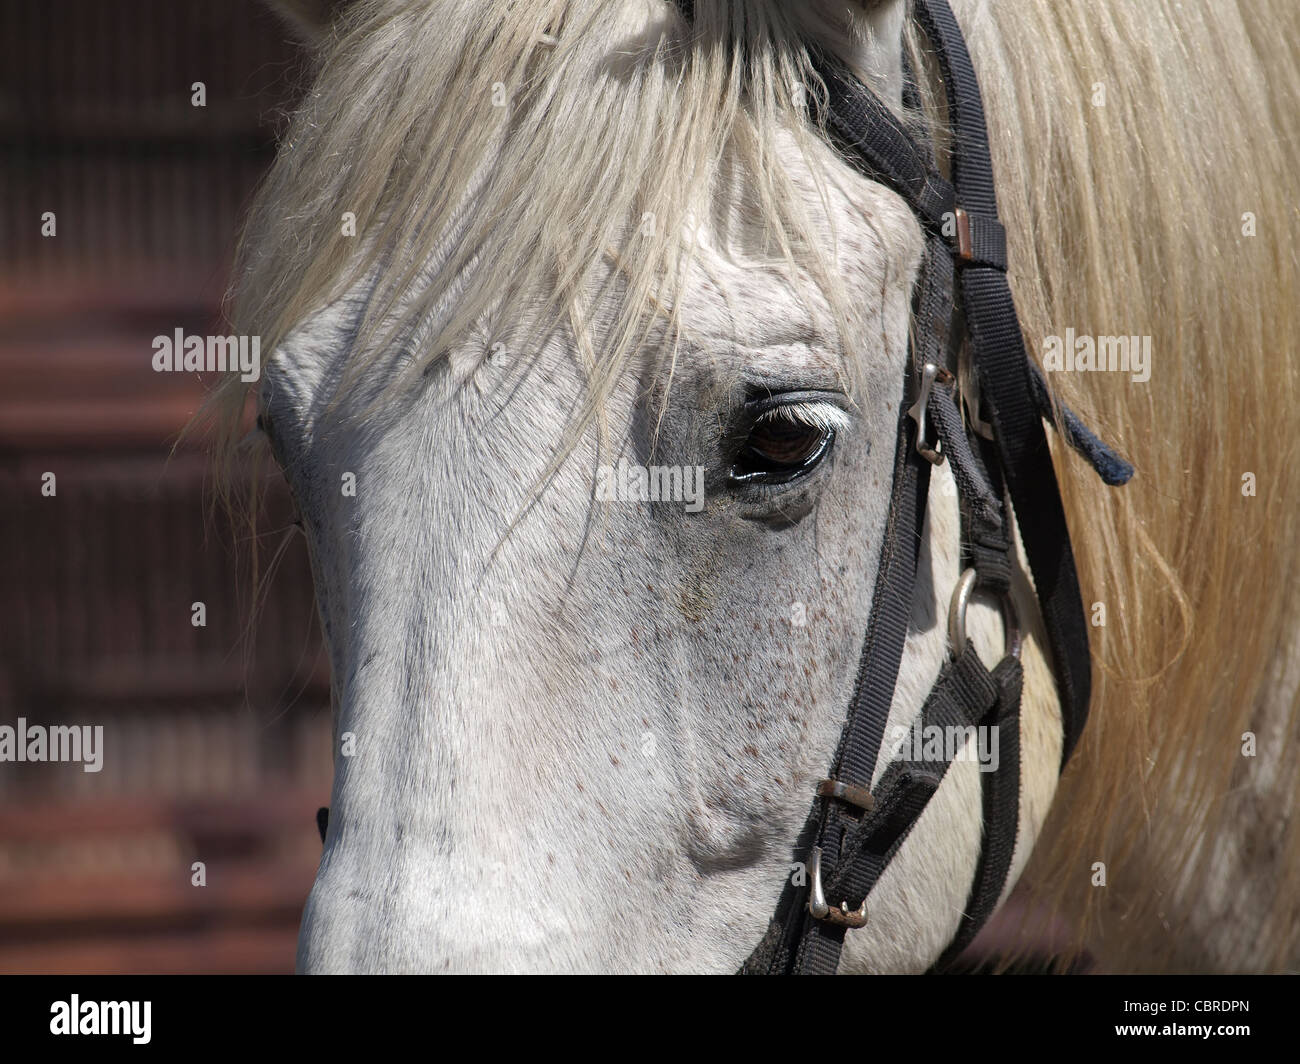 Closeup portrait of a white and gray horse with a light brown mane Stock Photo